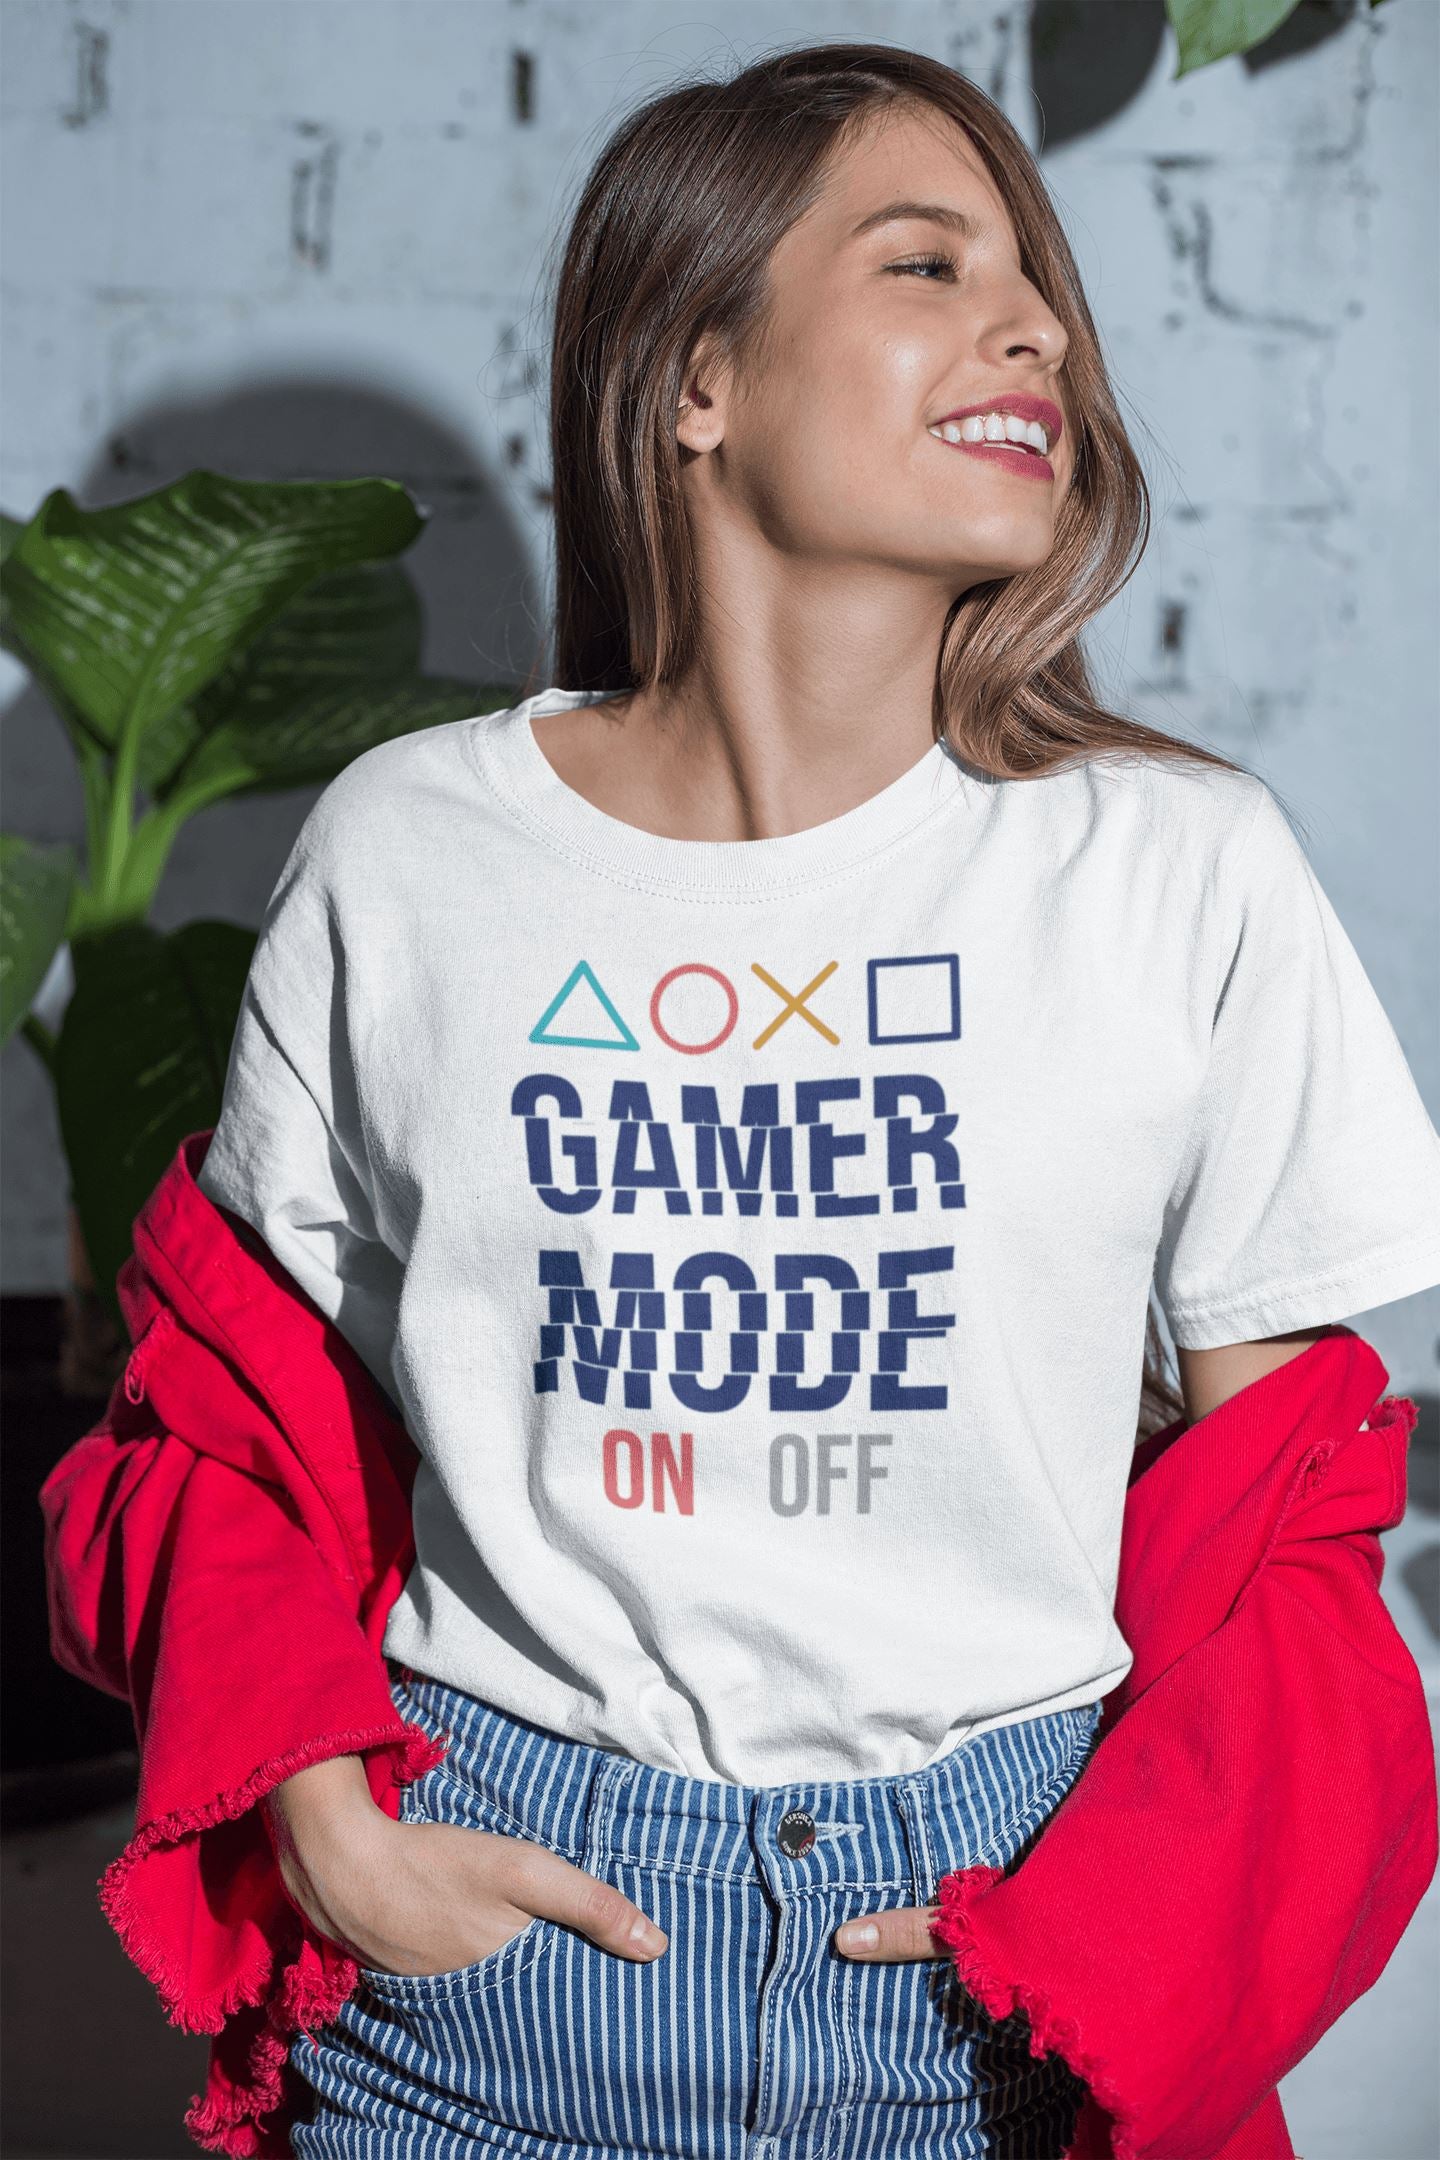 Gamer Mode On Off Special Gaming T Shirt for Men and Women - Catch My Drift India  black, clothing, game, gamer, gaming, made in india, shirt, t shirt, trending, tshirt